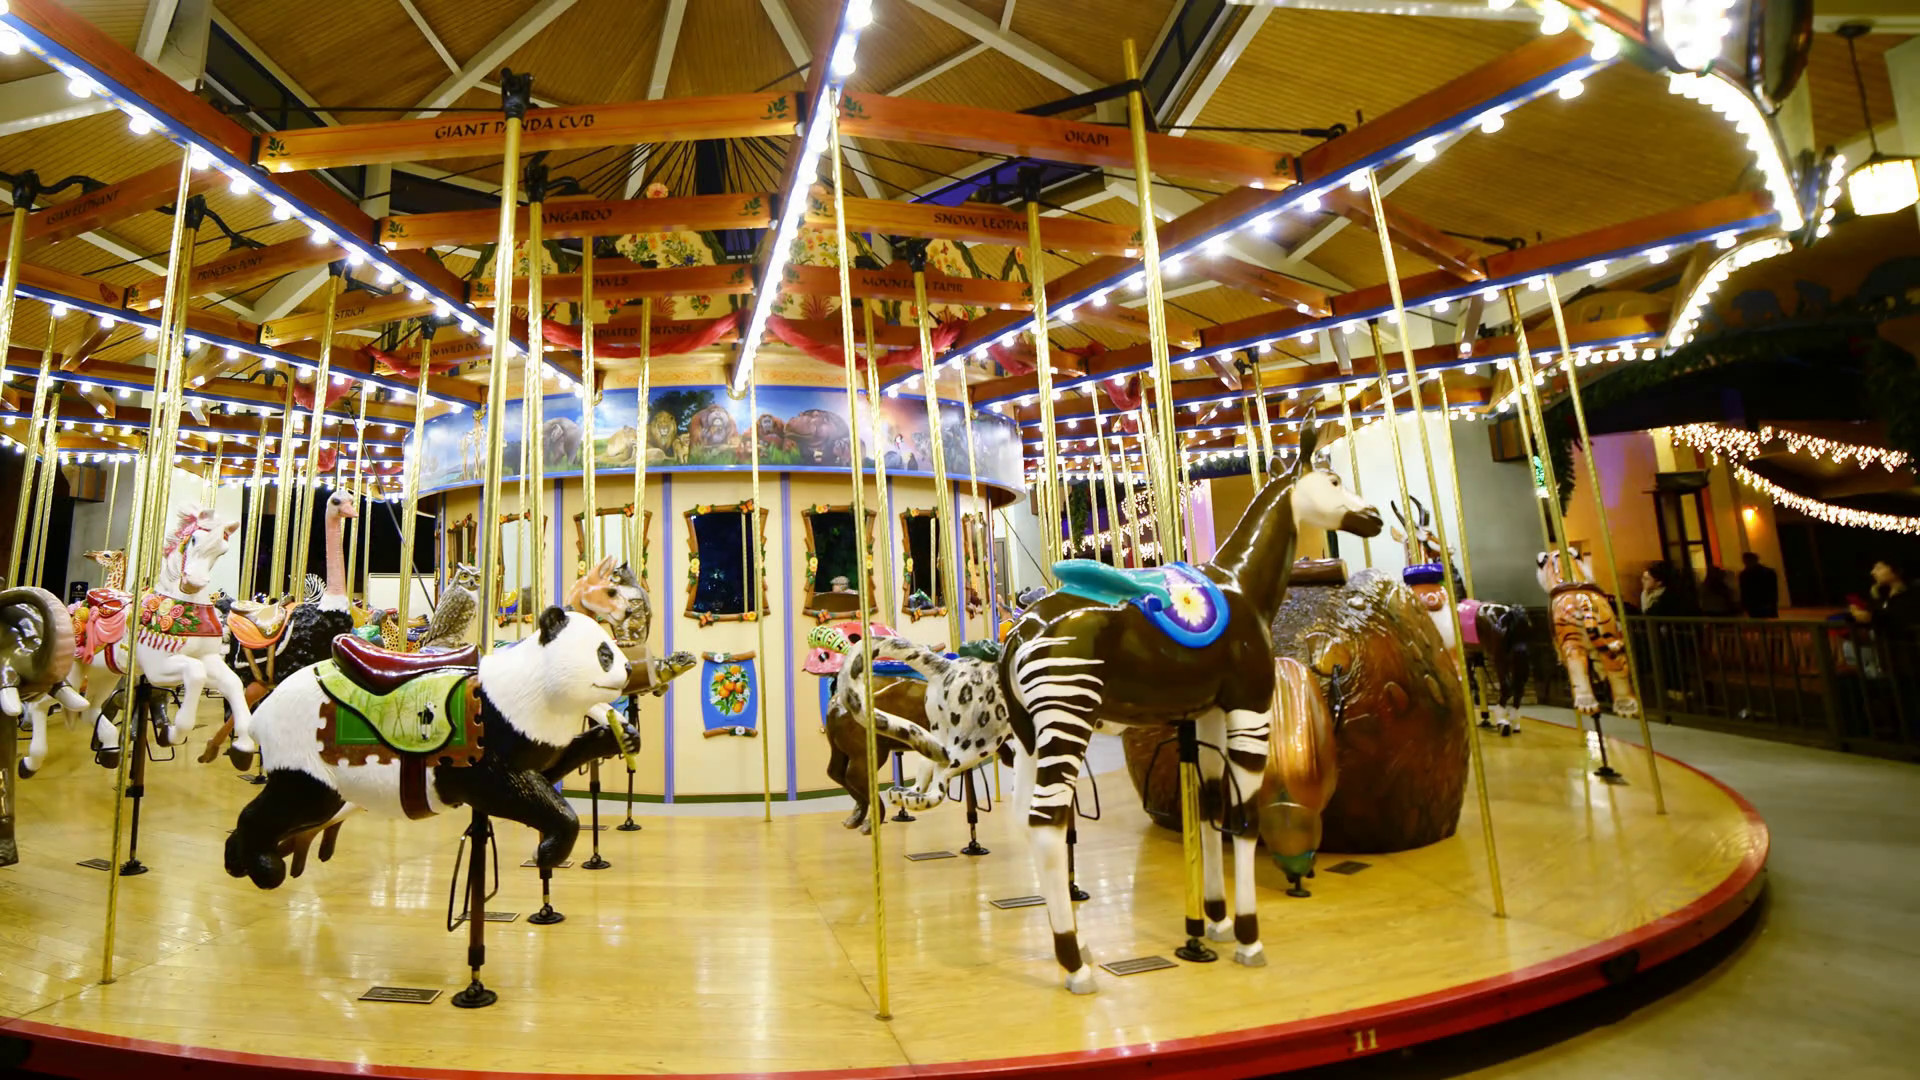 1920x1080 4K Time Lapse of Merry Go Round at Night -Pan Left- Stock Video Footage -  VideoBlocks